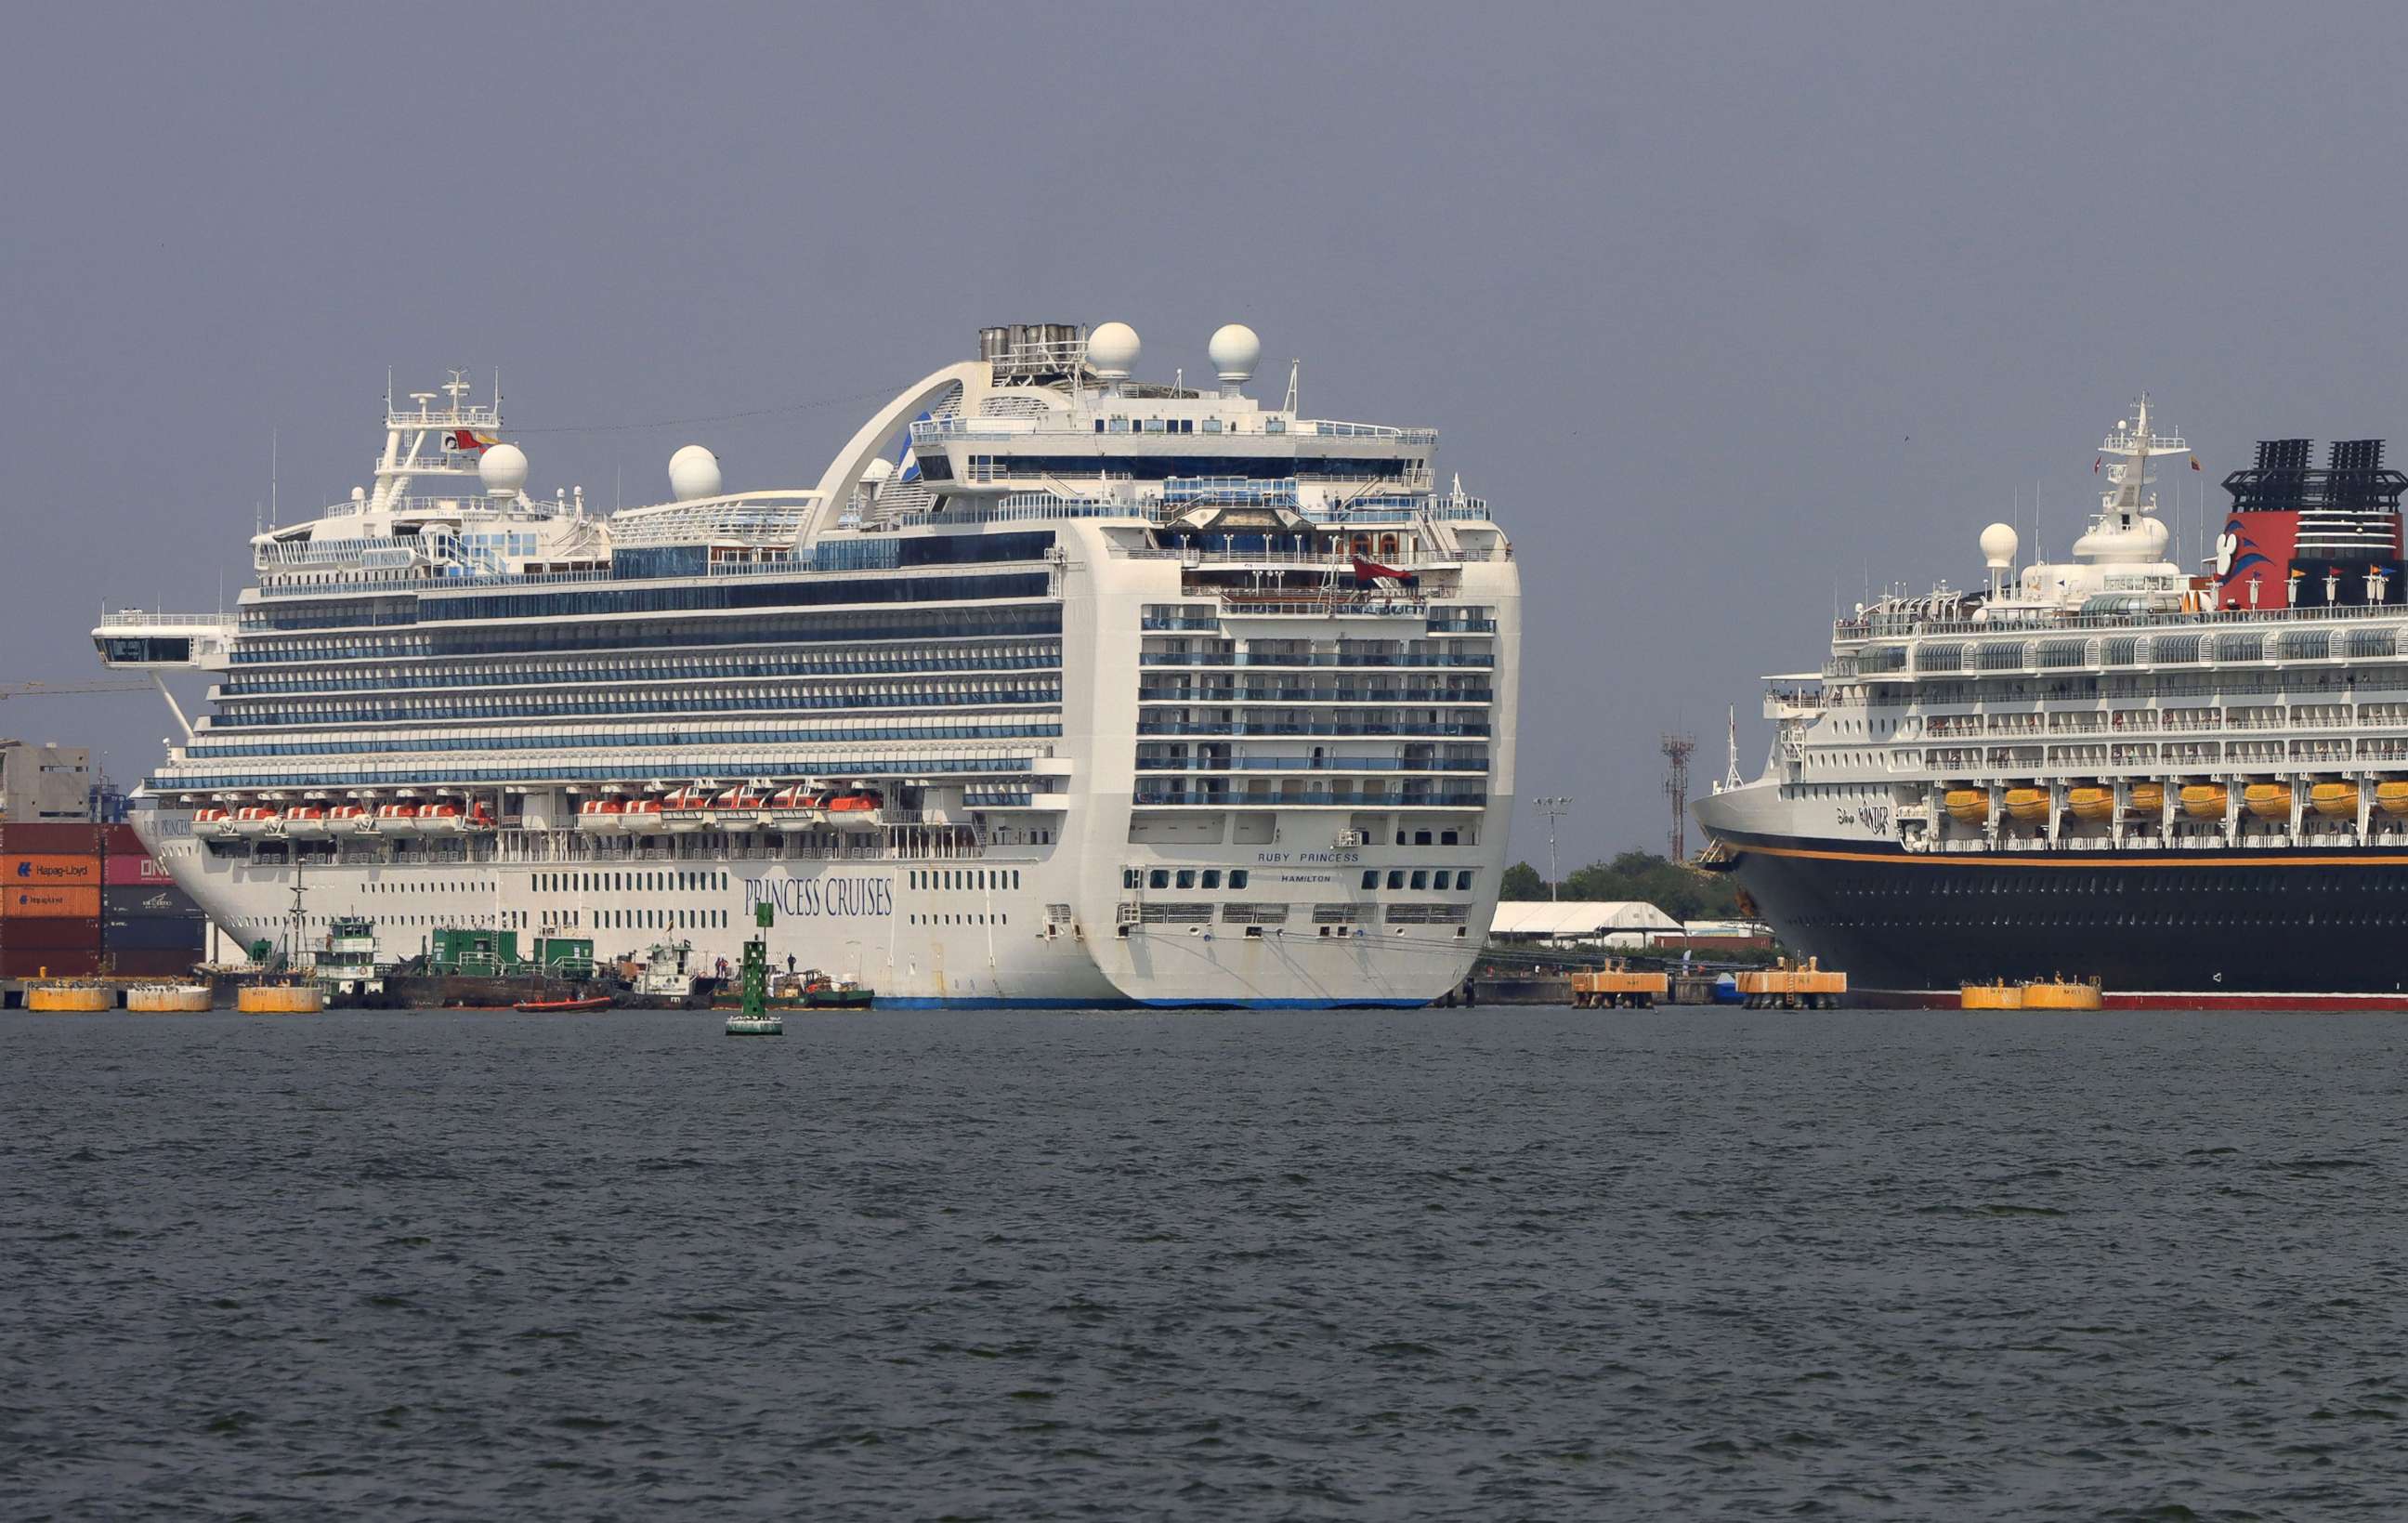 PHOTO: The Ruby Princess of the Princess Cruises line is seen, left in the tourist port of Cartagena de Indias, department of Bolivar, Colombia, March 9, 2022.